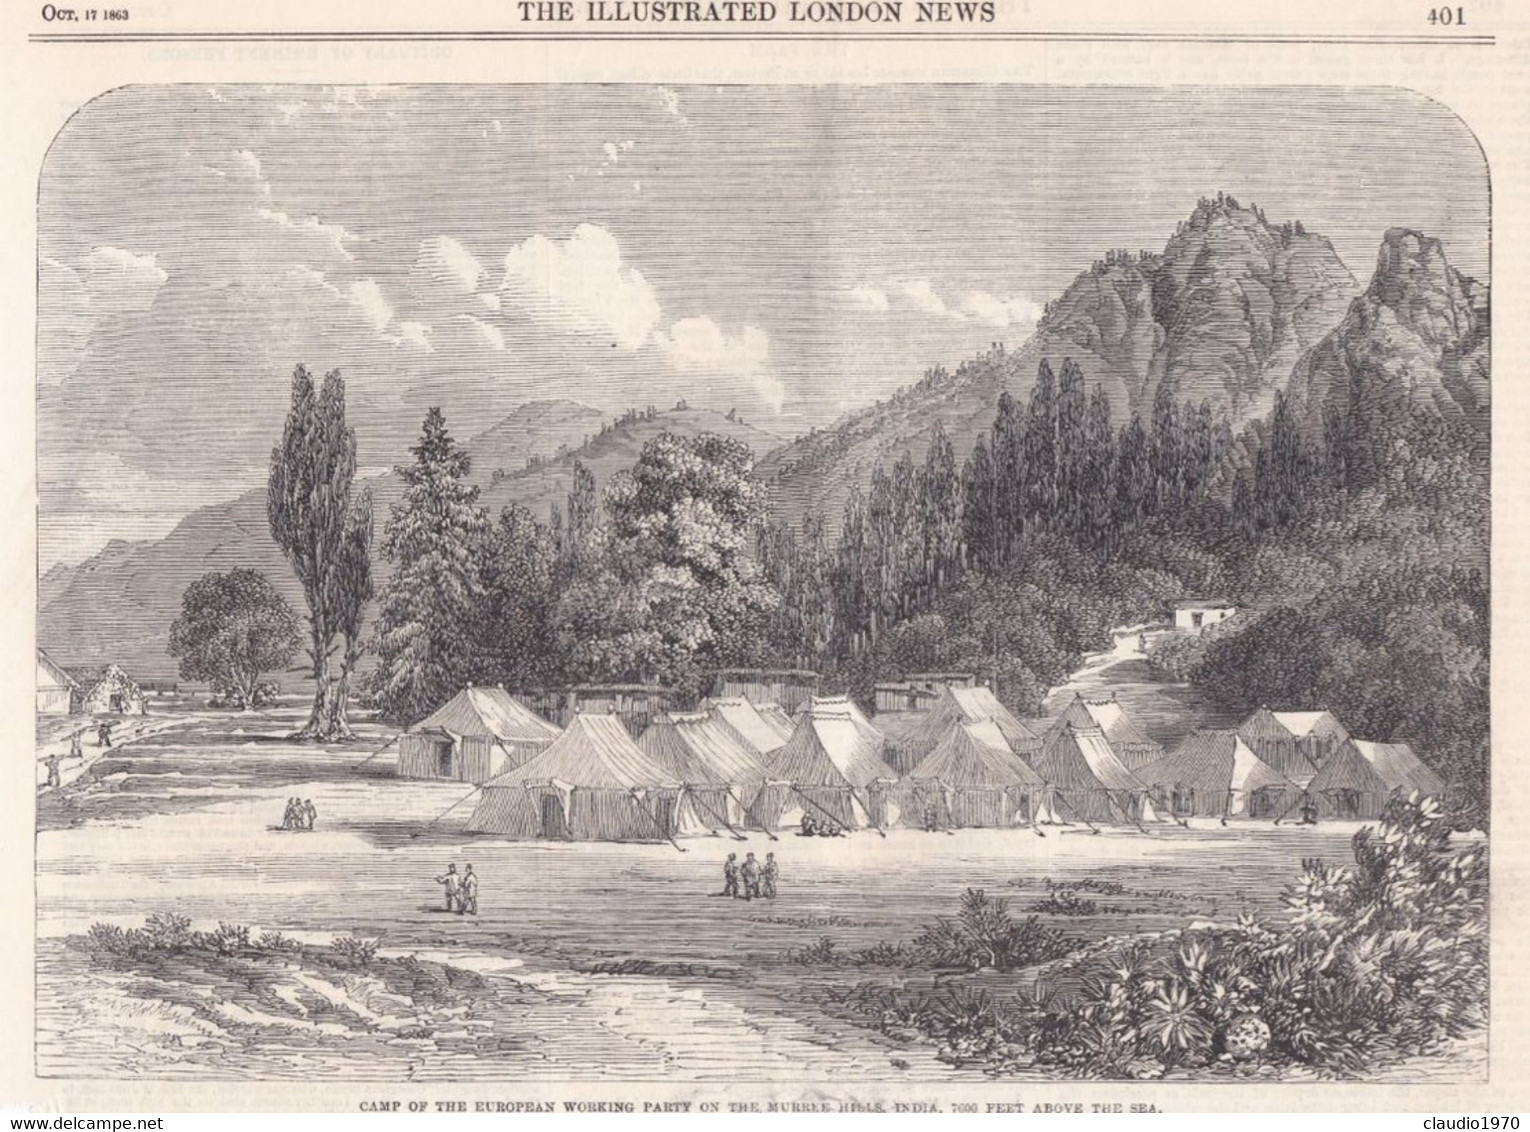 THE ILLUSTRATED LONDON NEWS  - RITAGLIO - STAMPA -CAMP OF EUROPEAN WORKING PARTY ON THE MURREE HELLES INDIA 700 - Ohne Zuordnung